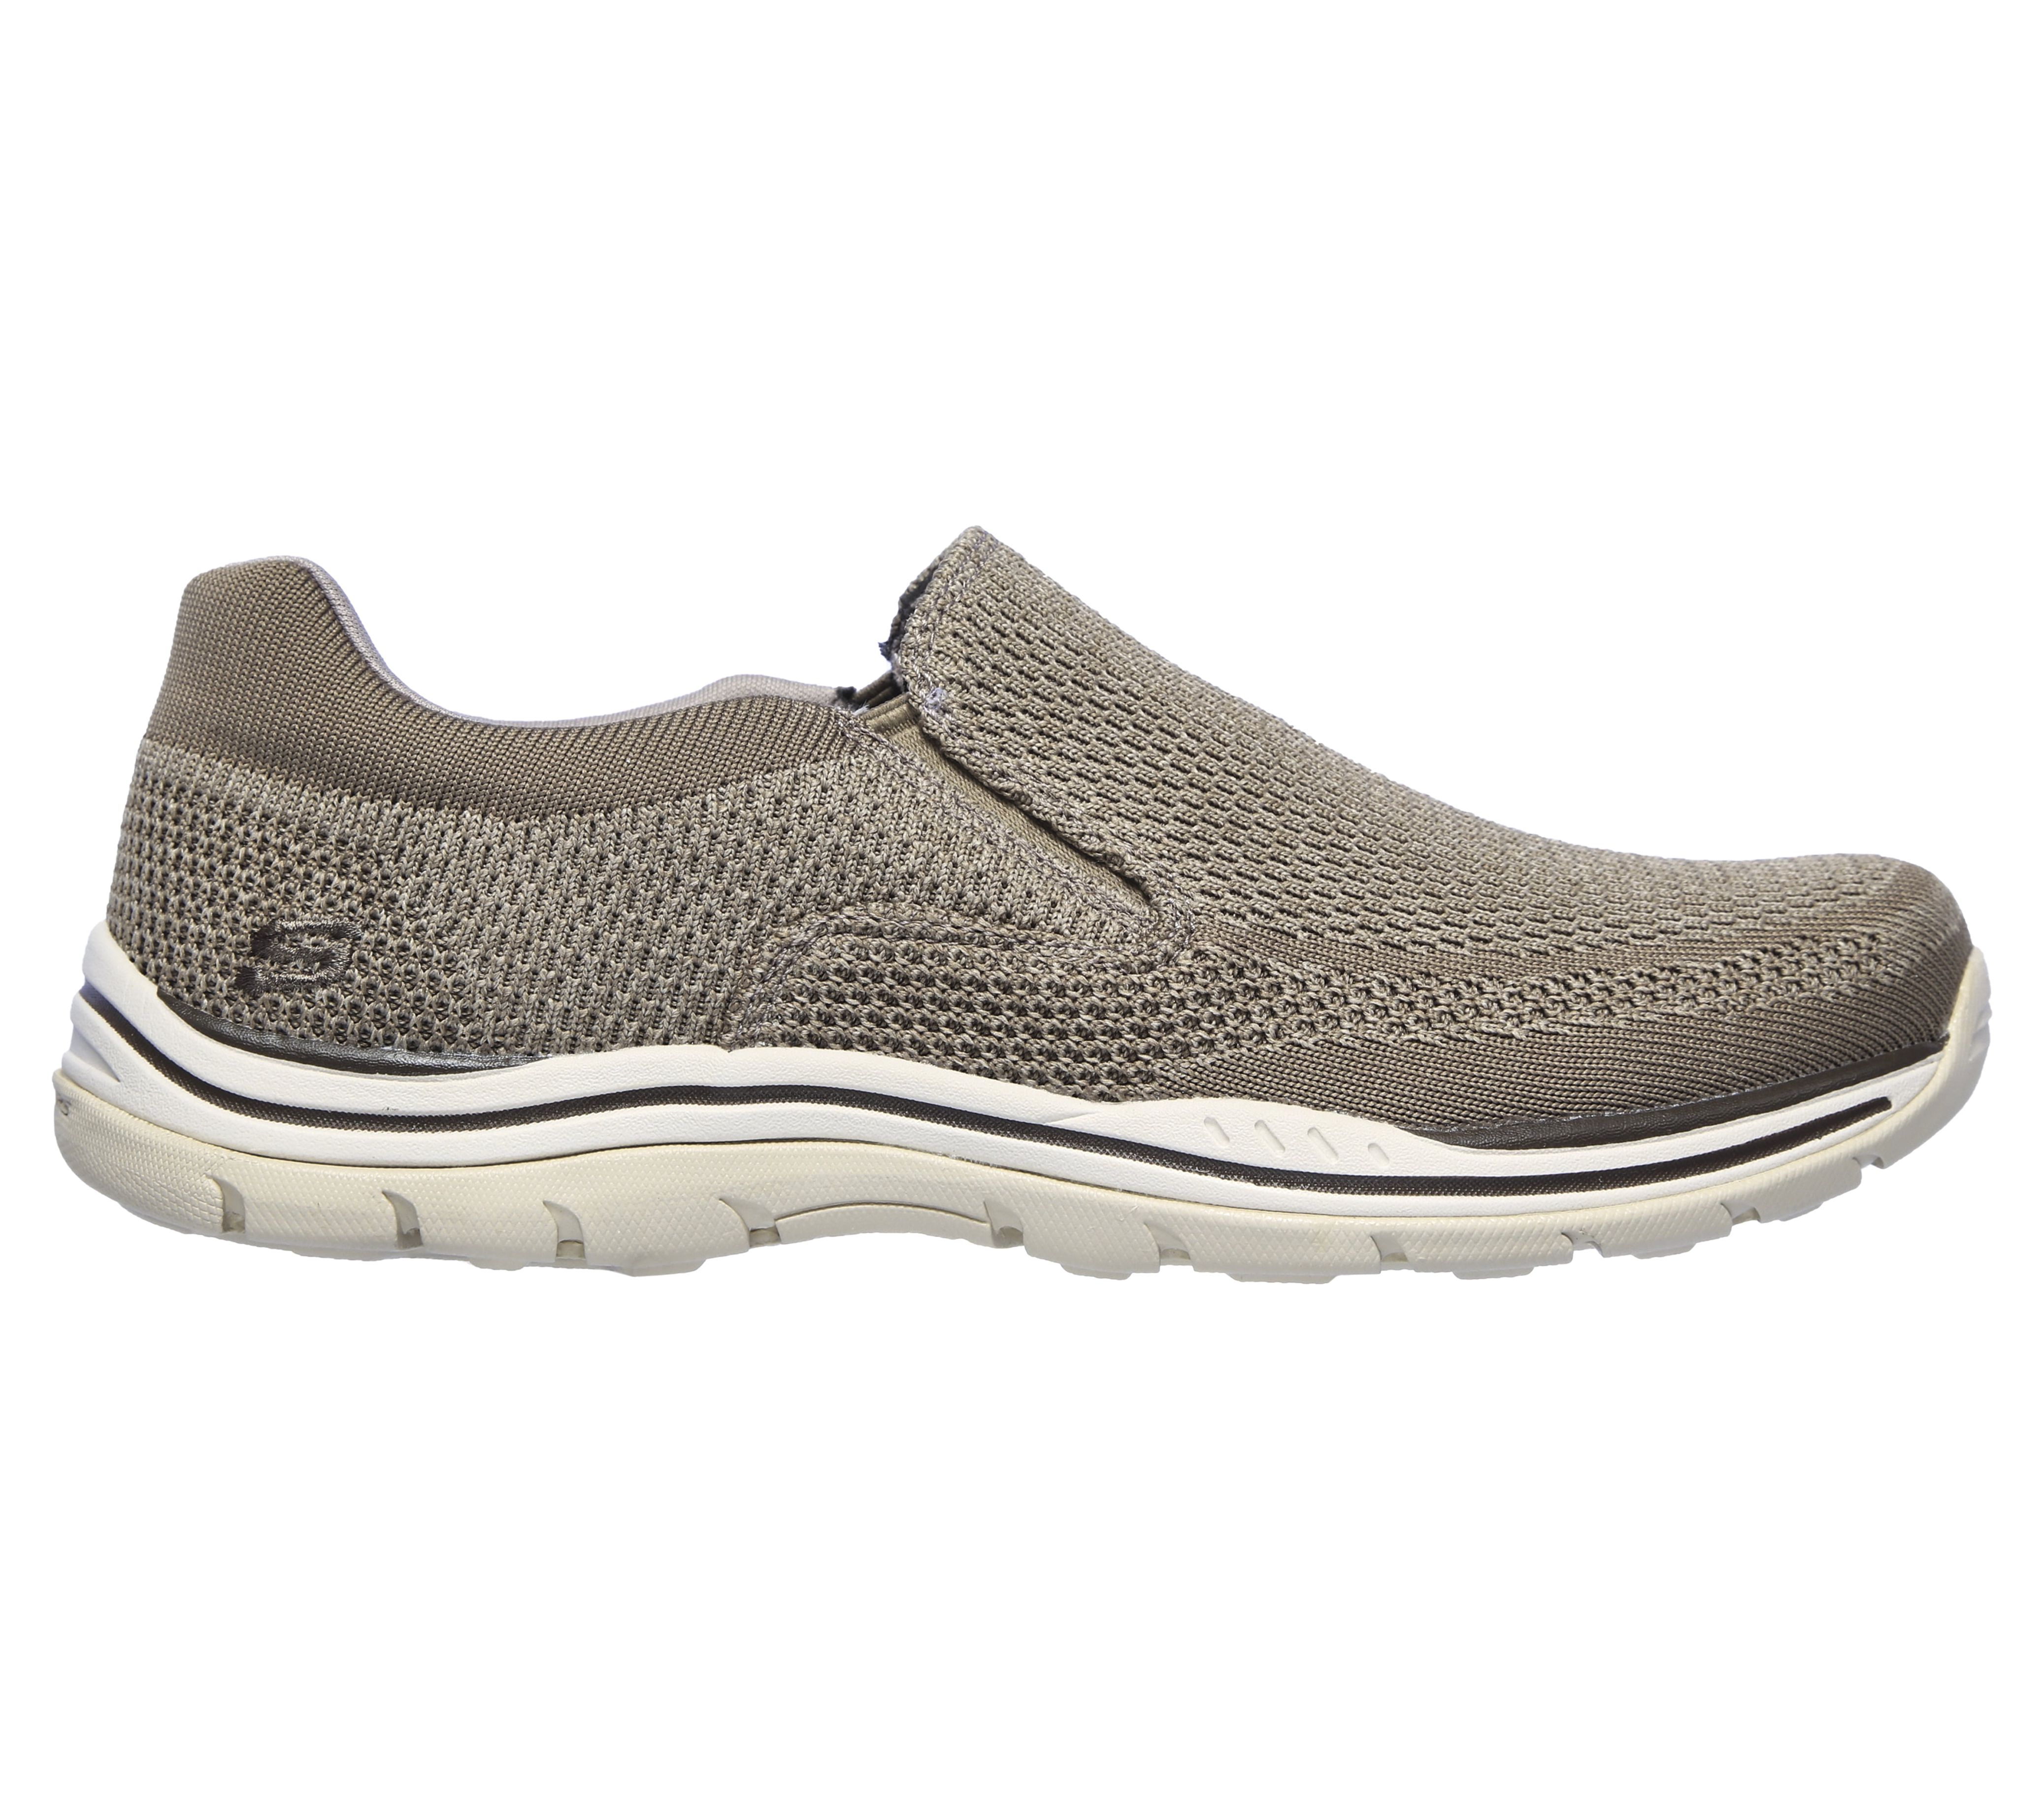 Skechers Men's Relaxed Fit Expected Gomel Casual Slip-on Sneaker (Wide Width Available) - image 3 of 7